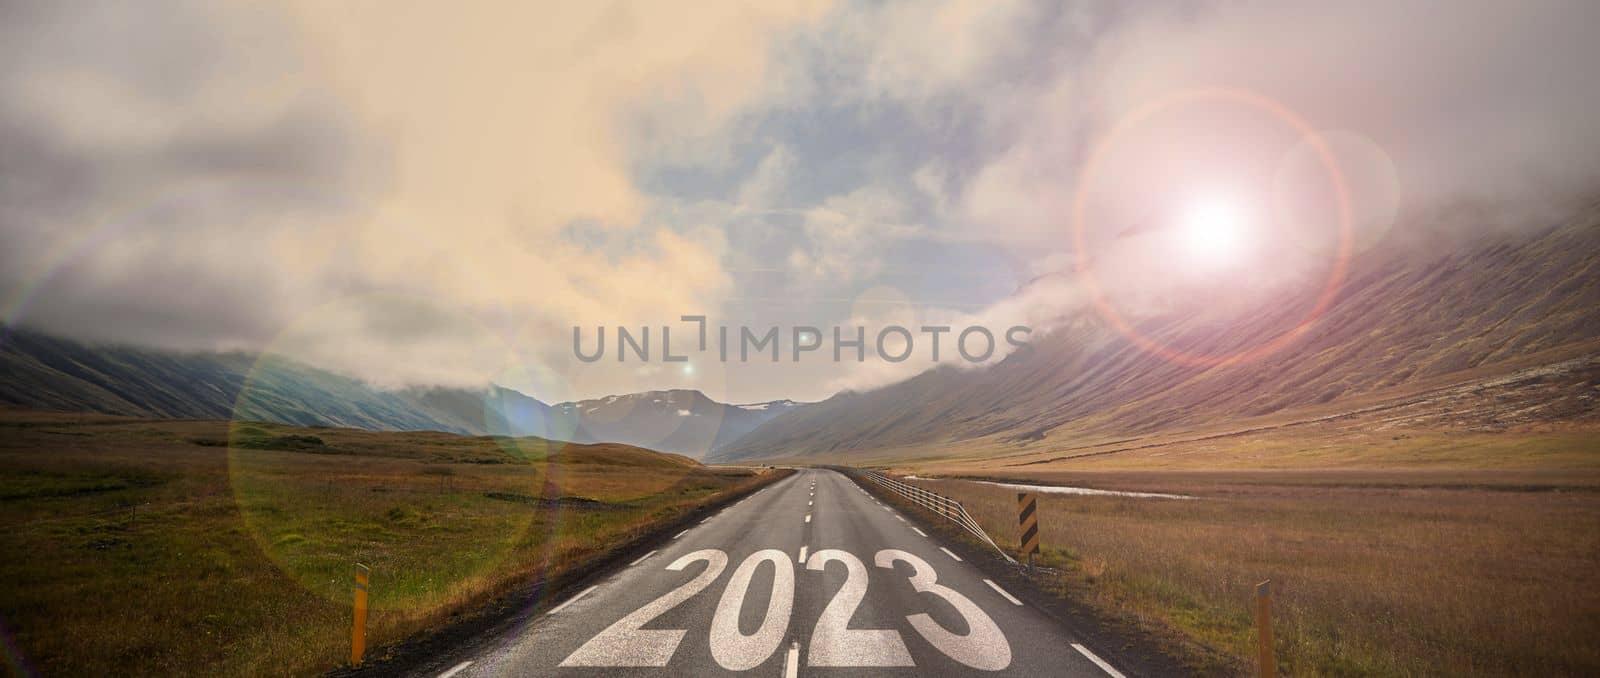 The word 2023 written on highway road in the middle of empty asphalt road by driver-s